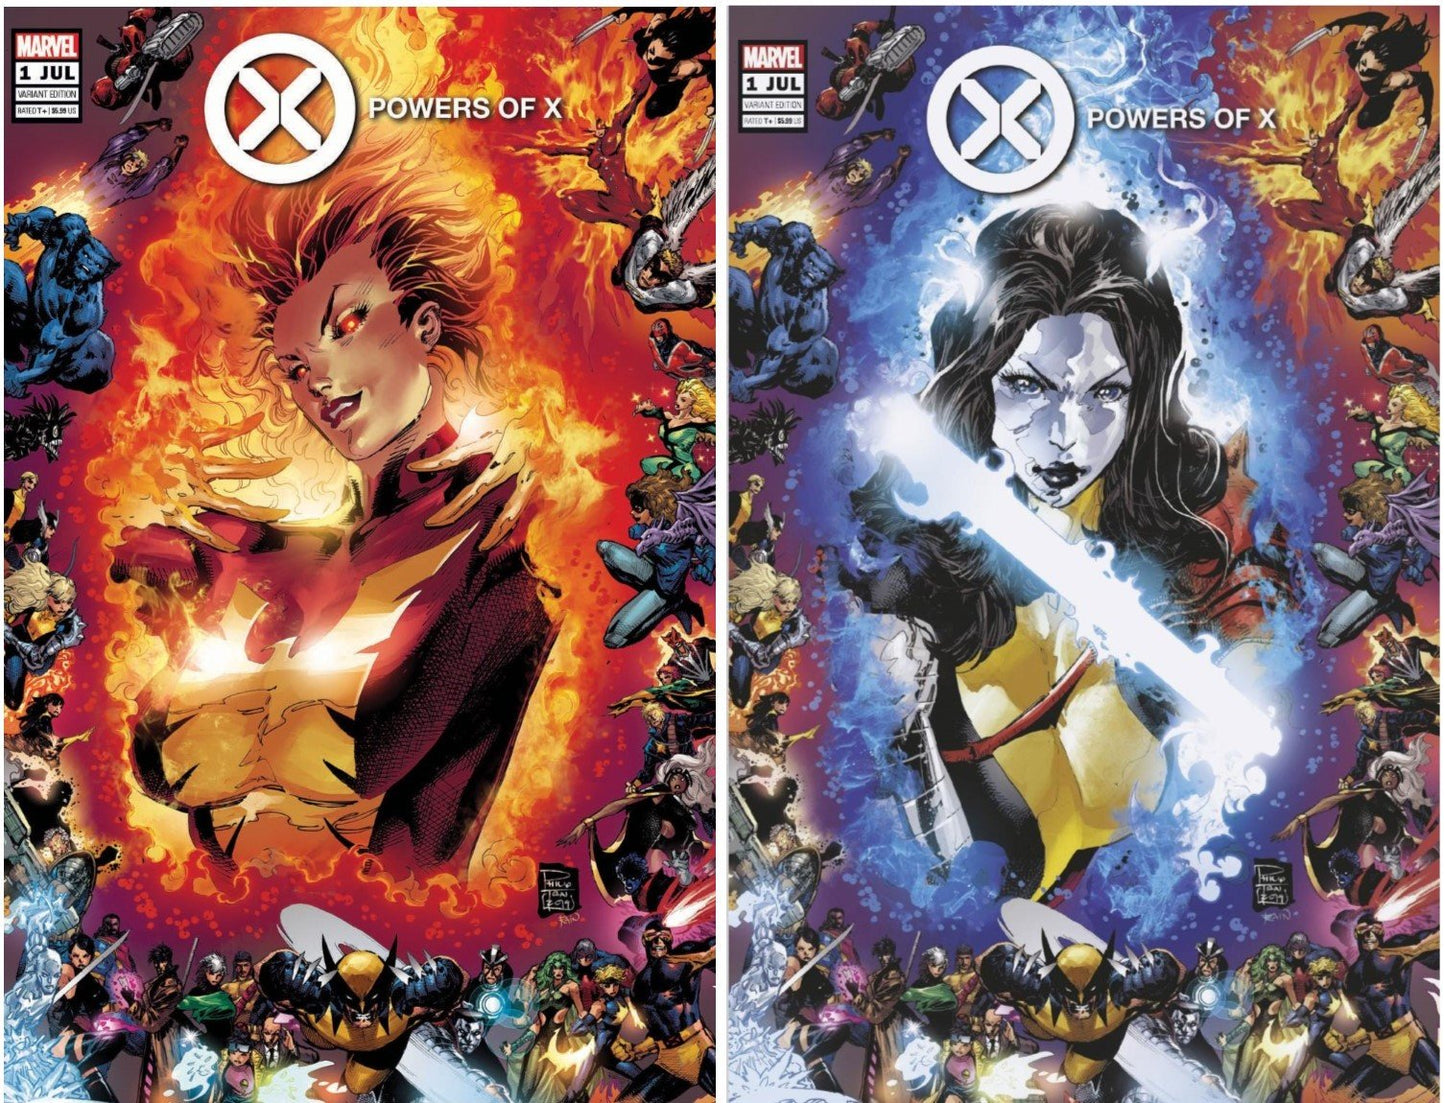 POWERS OF X #1 (OF 6) PHILIP TAN VARIANTS LIMITED TO 1000 - COVER OPTIONS